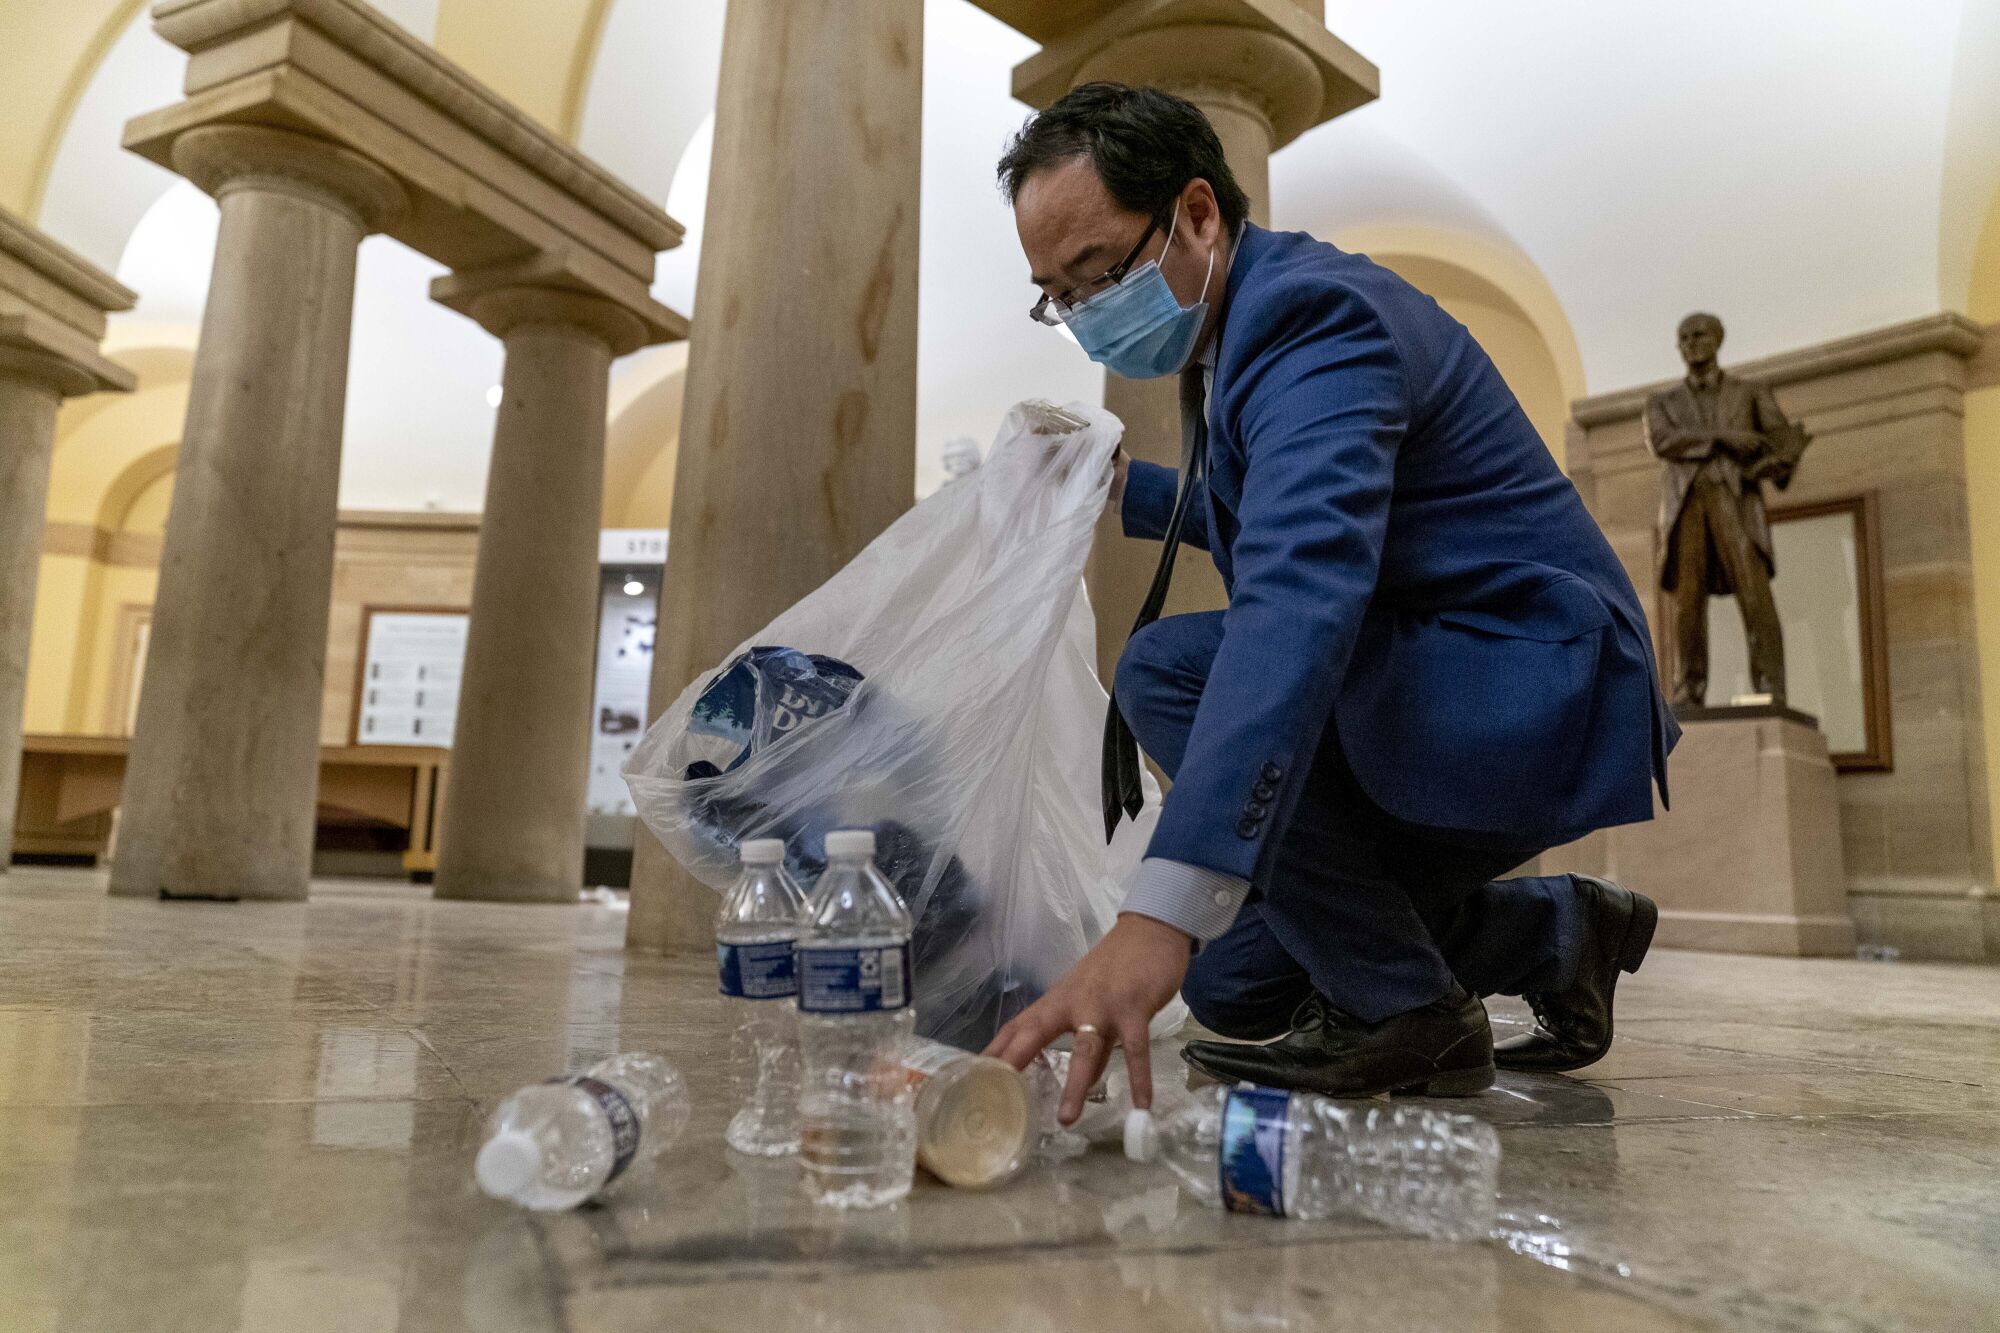 Rep. Andy Kim (D-N.J.) cleans up debris and trash strewn across the floor in the early morning hours.